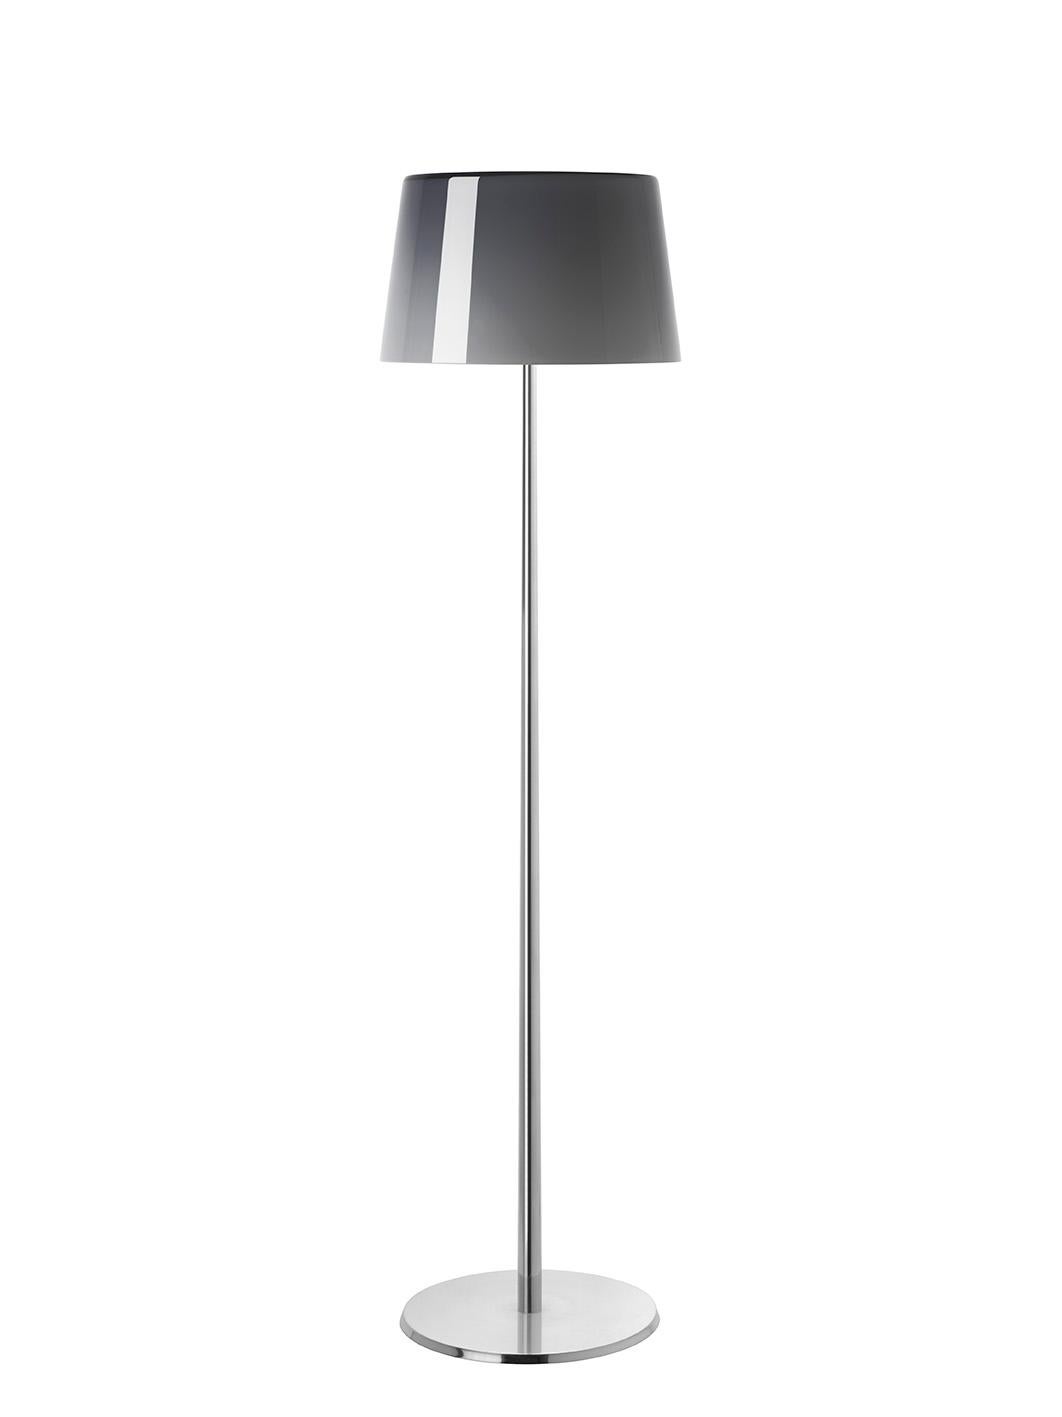 Floor lamp (reading lamp) with direct and diffused light. Hand blown cased glass diffuser with glossy and finish, white on the inside and colored on the outside. Die cast aluminium base and stem is hand and finished and polished, liquid painted in